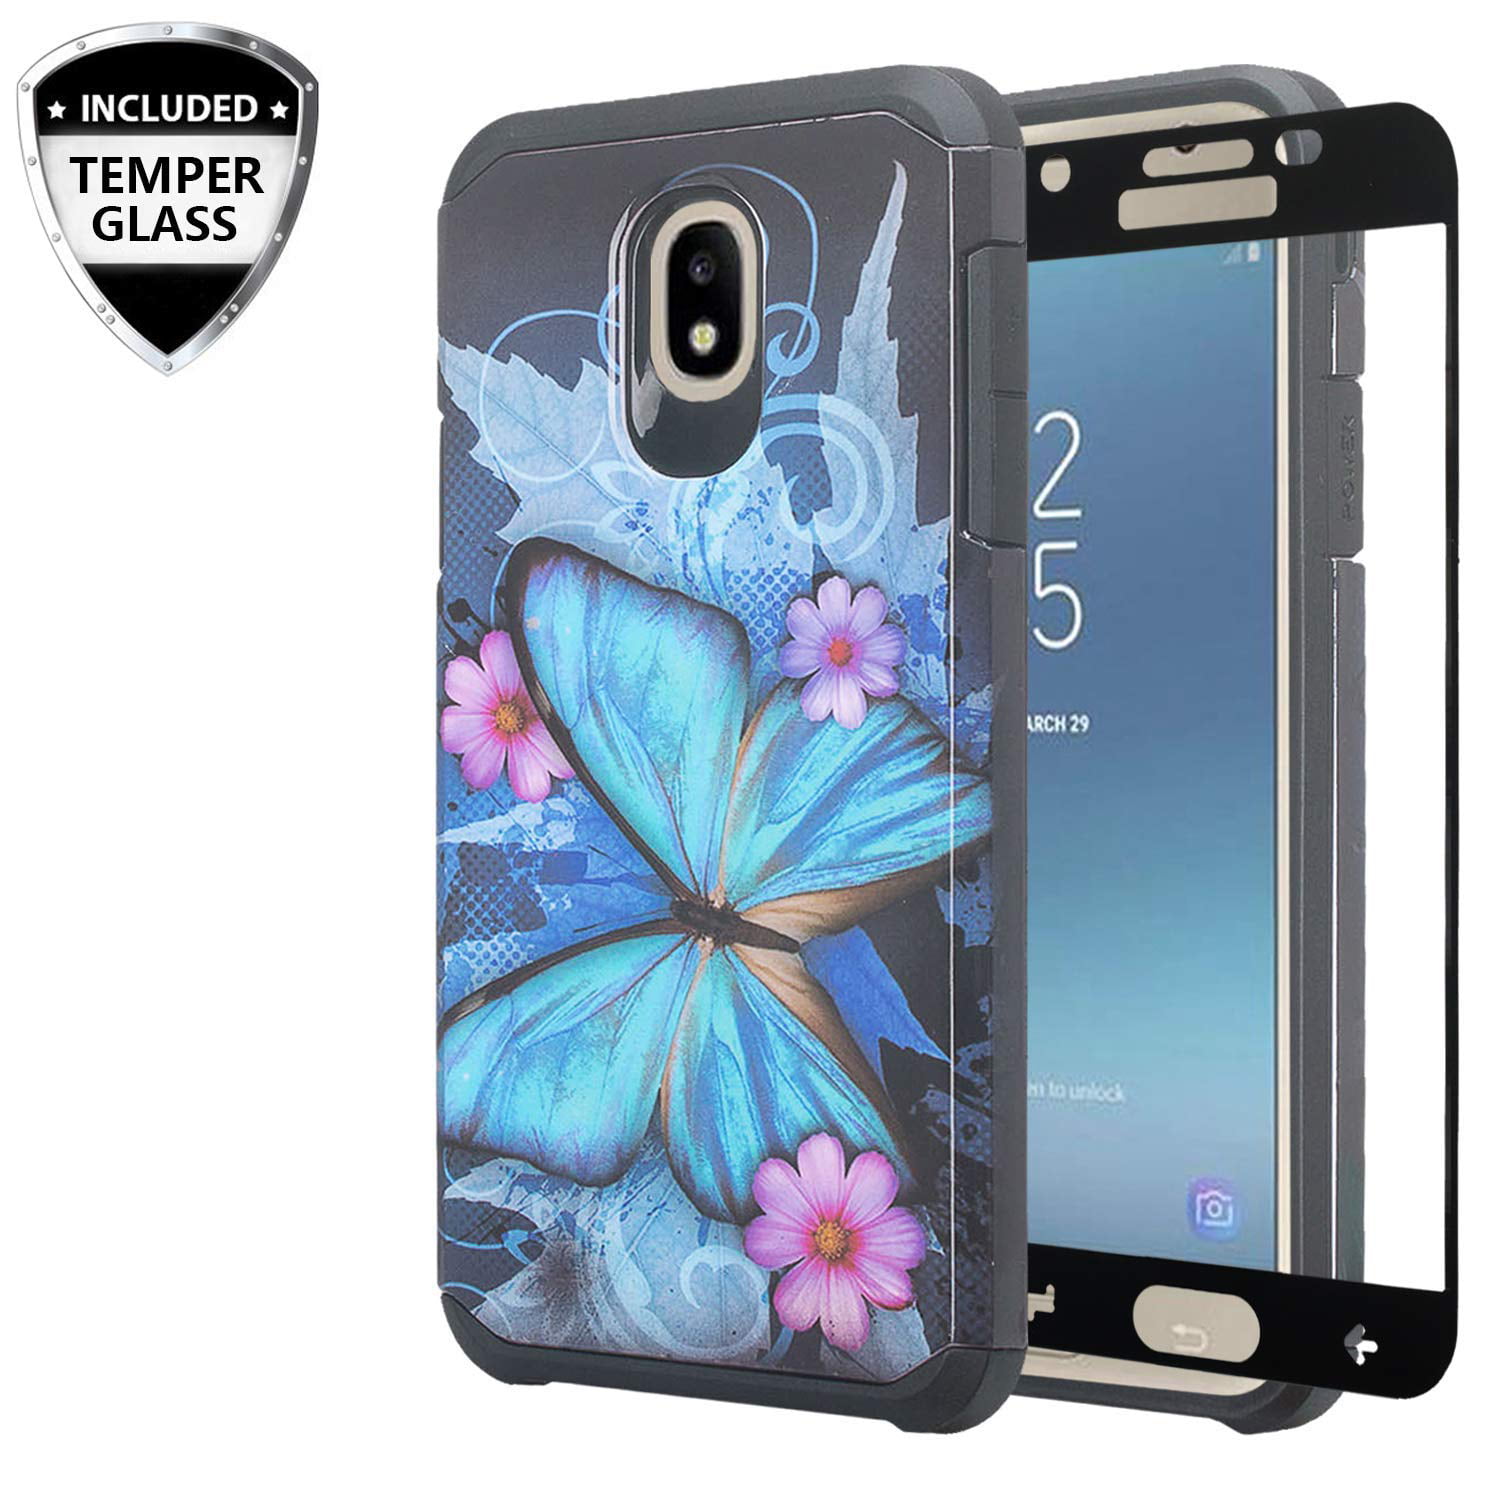 Odysseus voorbeeld Persoon belast met sportgame Galaxy J7 Star Case, J7 Refine /J7 V 2nd Gen /J7 Crown w/[Tempered Glass  Screen Protector] Silicone Shock Proof Dual Layer Hard Case Cover for  Samsung Galaxy J7 2018 - Rainbow Flower -